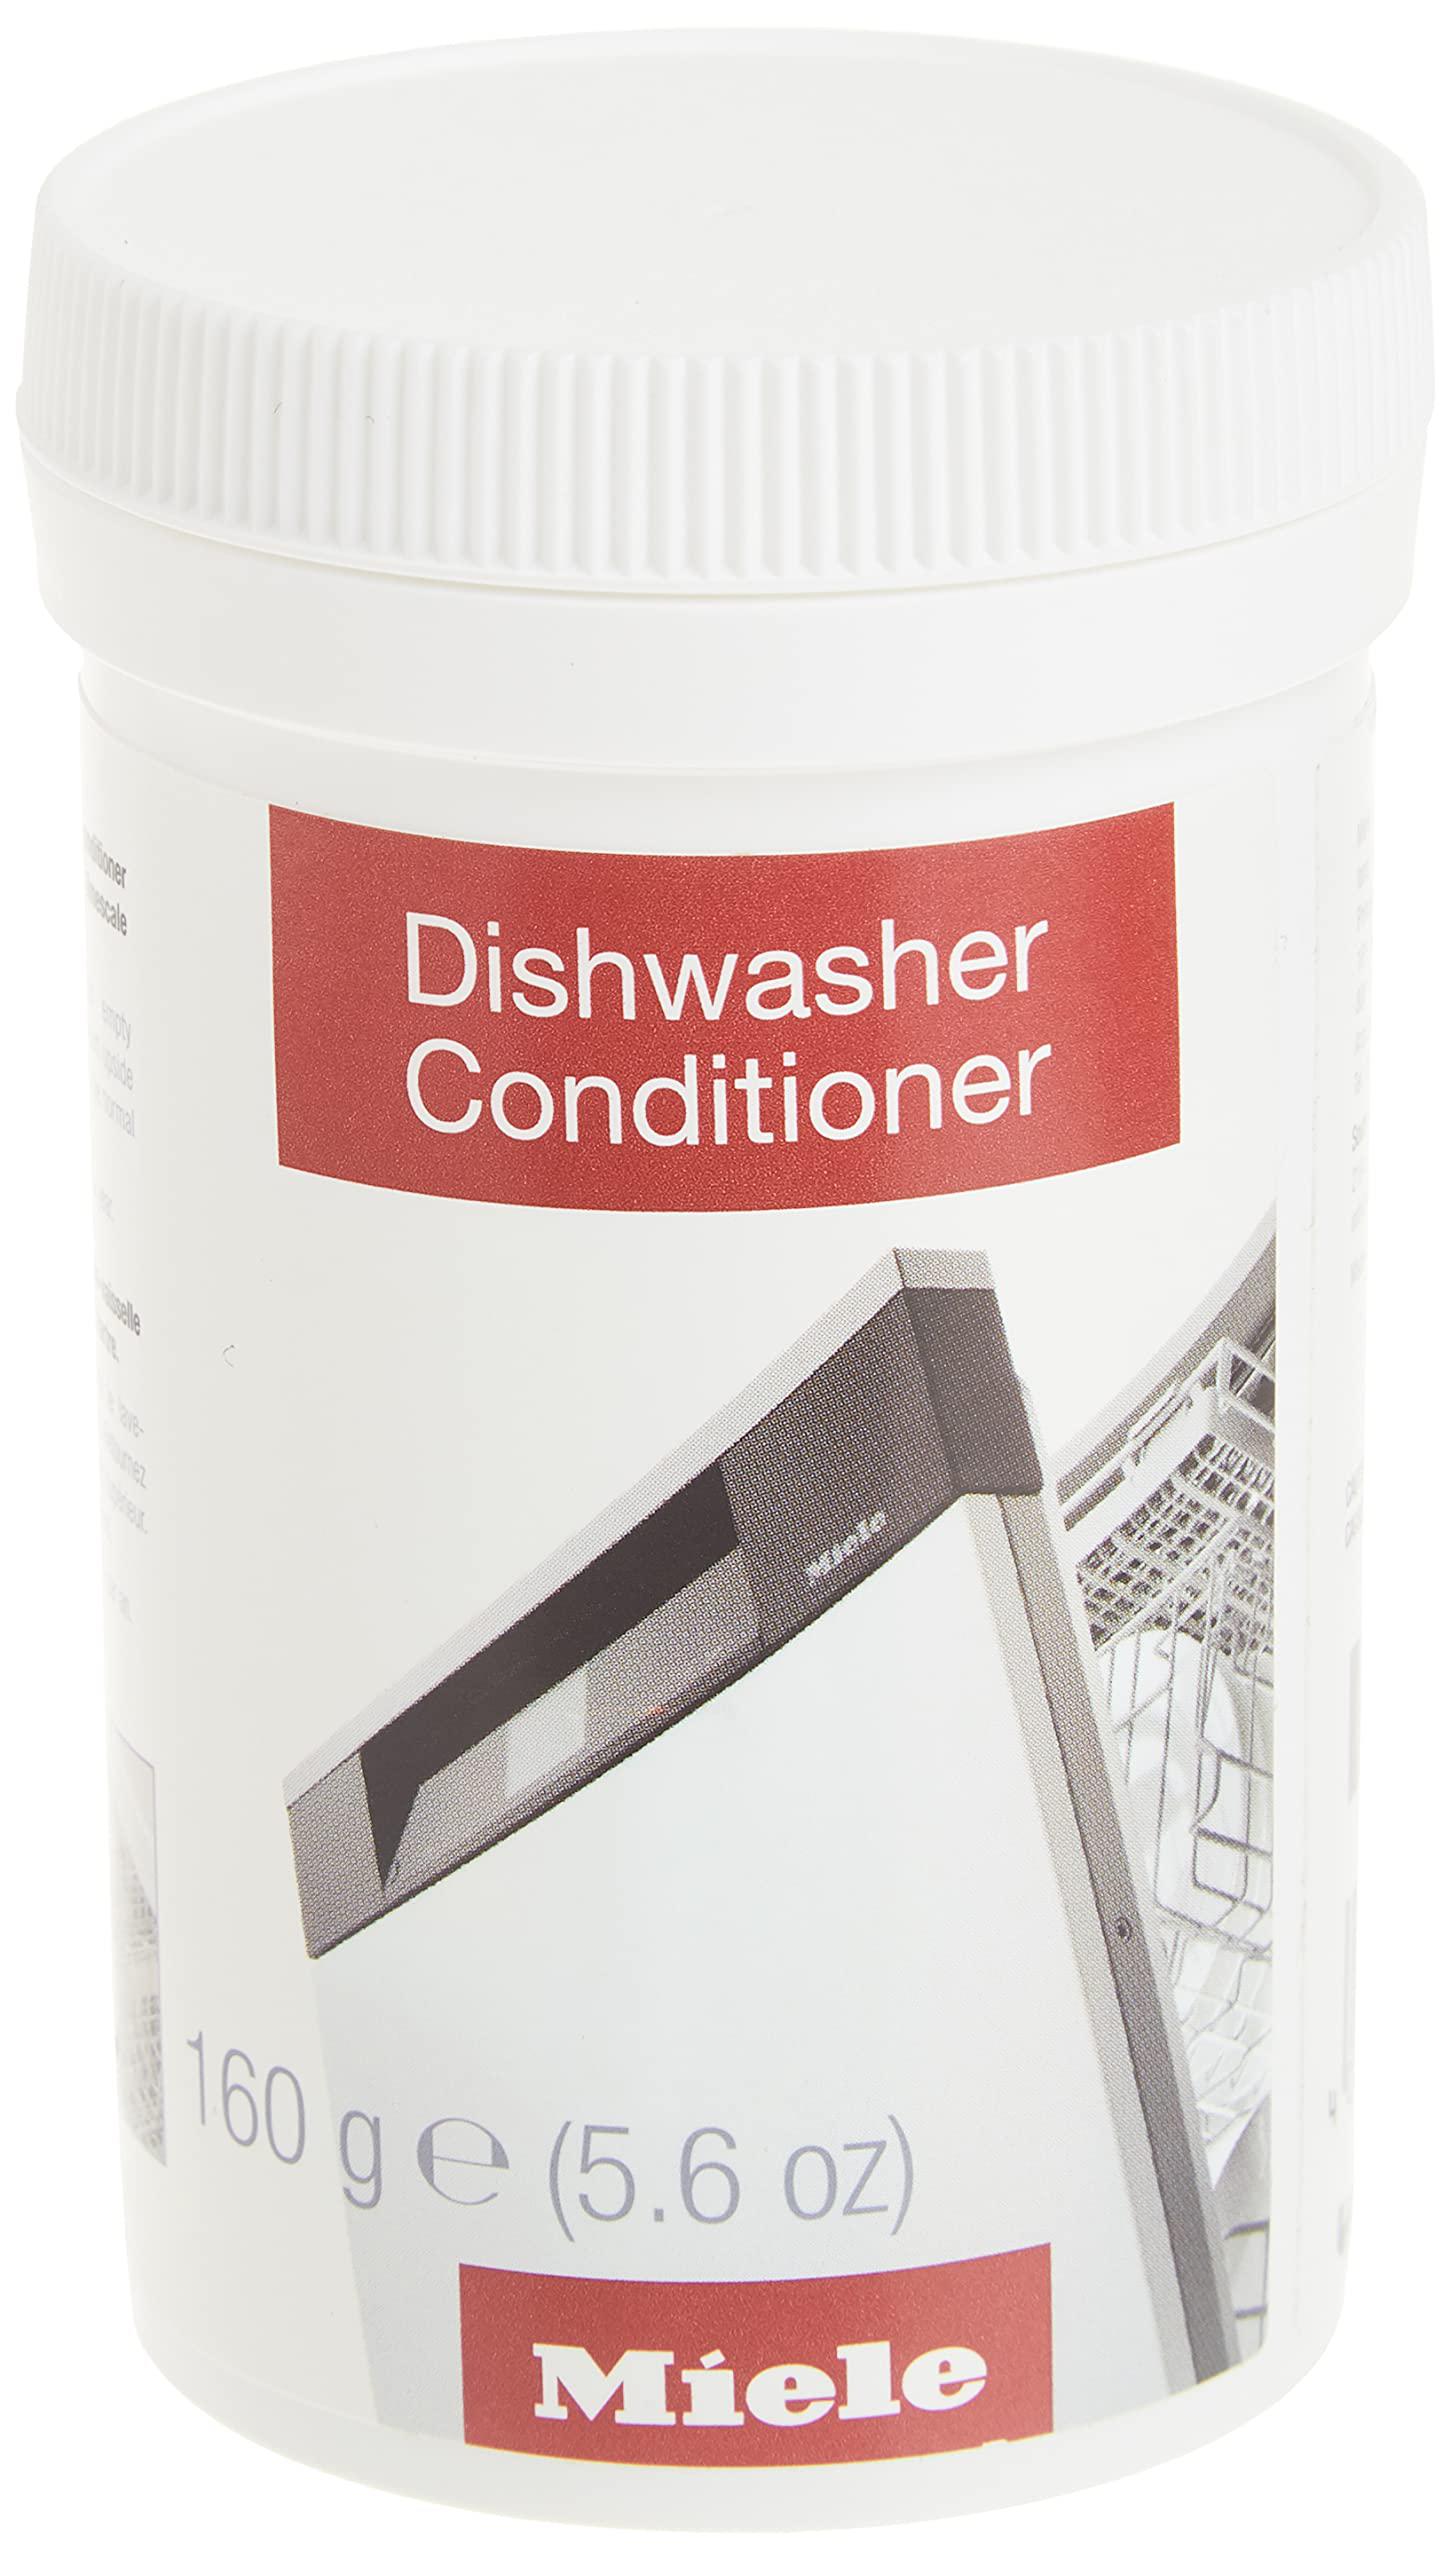 miele dishclean dishwasher cleaner, care product for the optimal functioning of dishwashers, removing odors and limescale dep